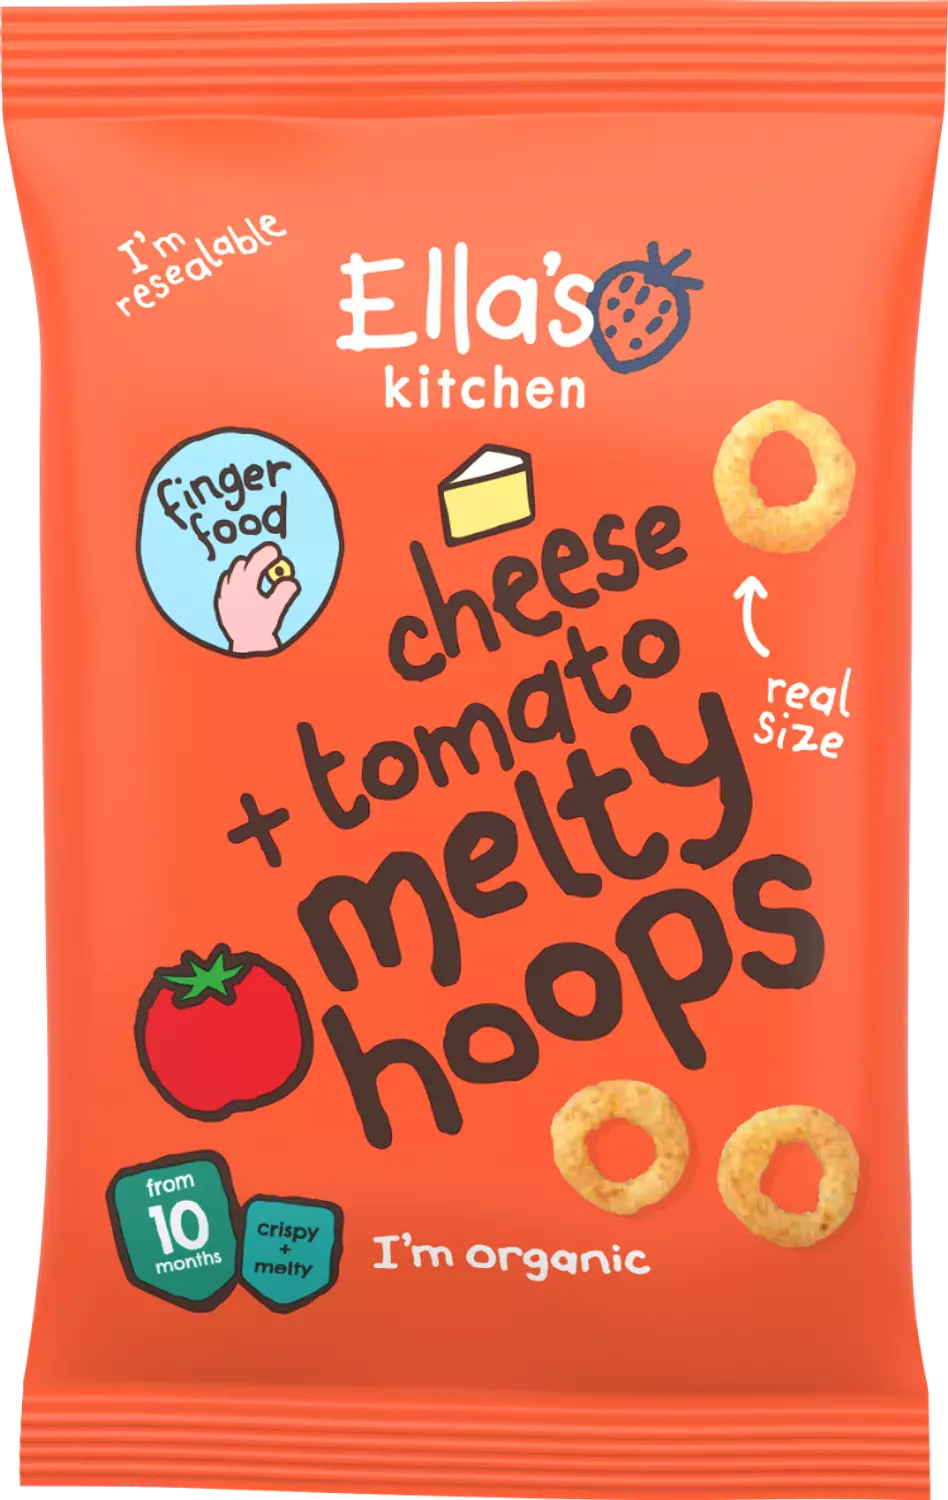 Cheese + tomato melty hoop - 20 grams  hover image